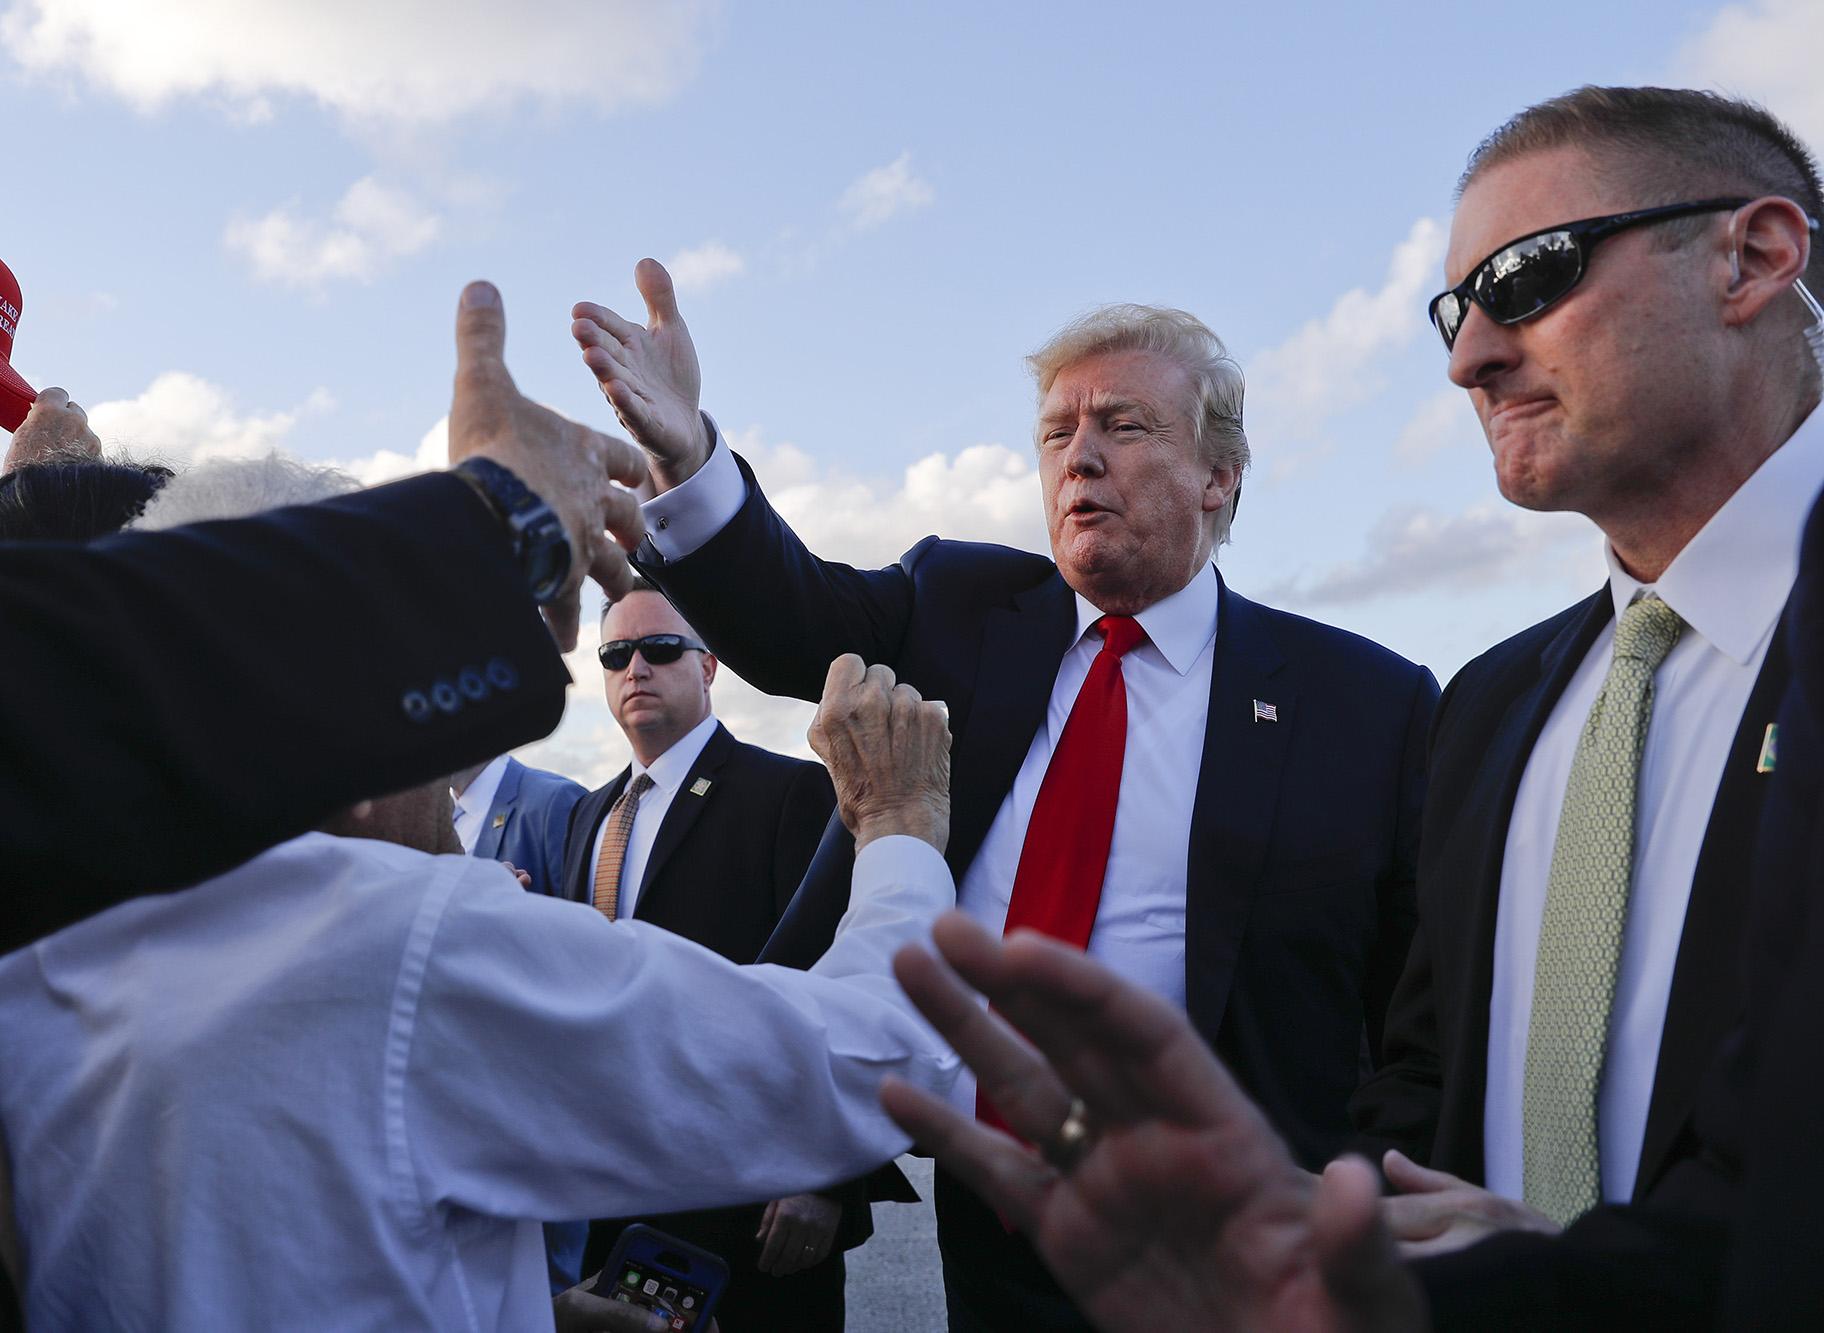 President Donald Trump reaches out to greet supporters on the tarmac upon his arrival at Palm Beach International Airport on Thursday, April 18, 2019, in West Palm Beach, Florida. (AP Photo / Pablo Martinez Monsivais)